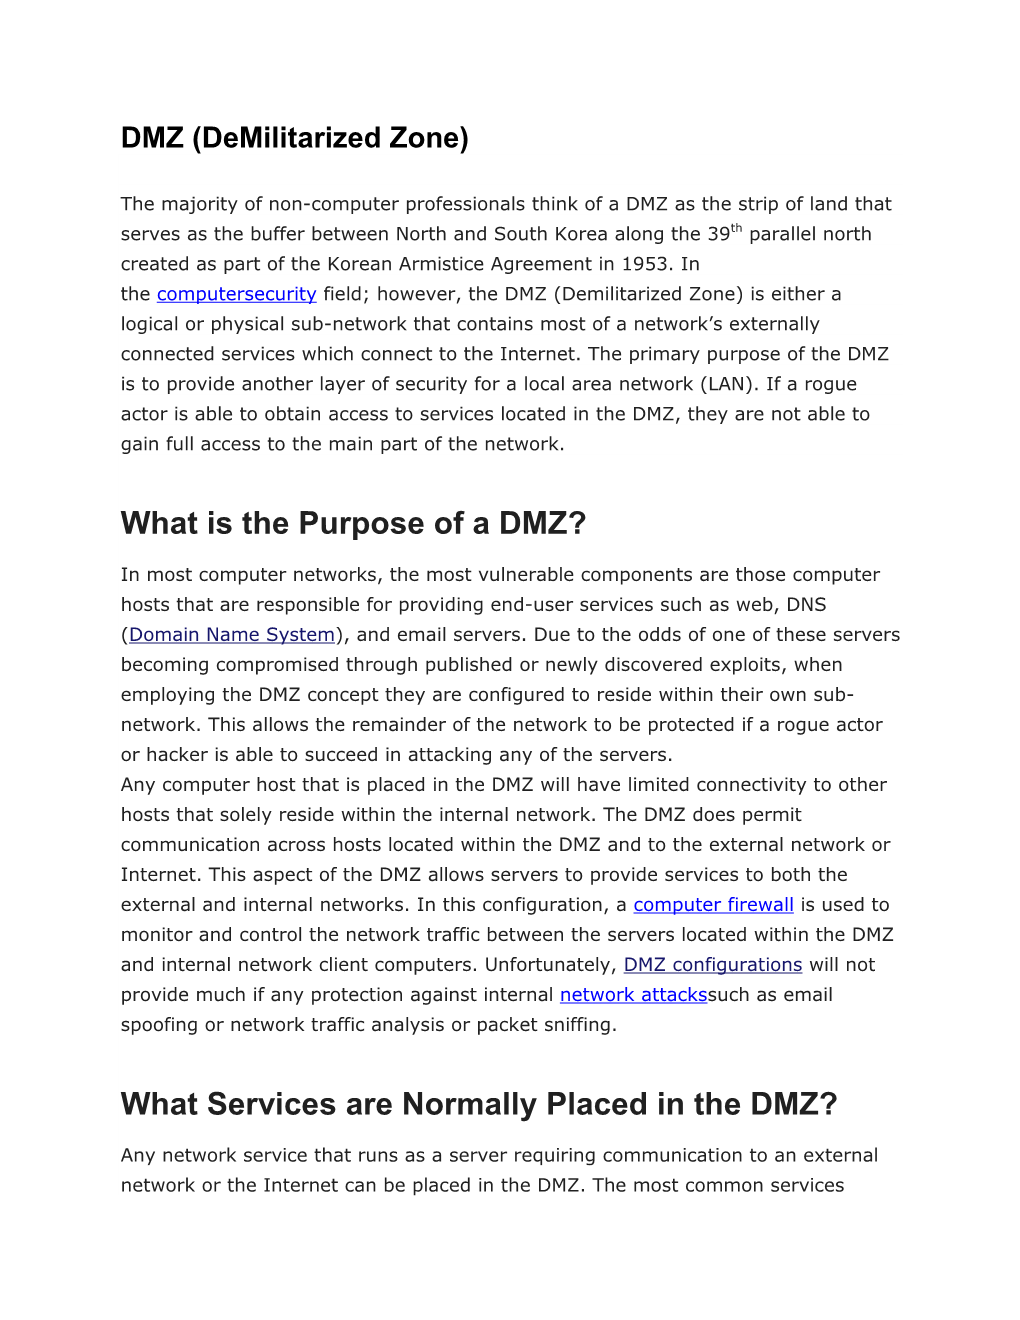 What Services Are Normally Placed in the DMZ?